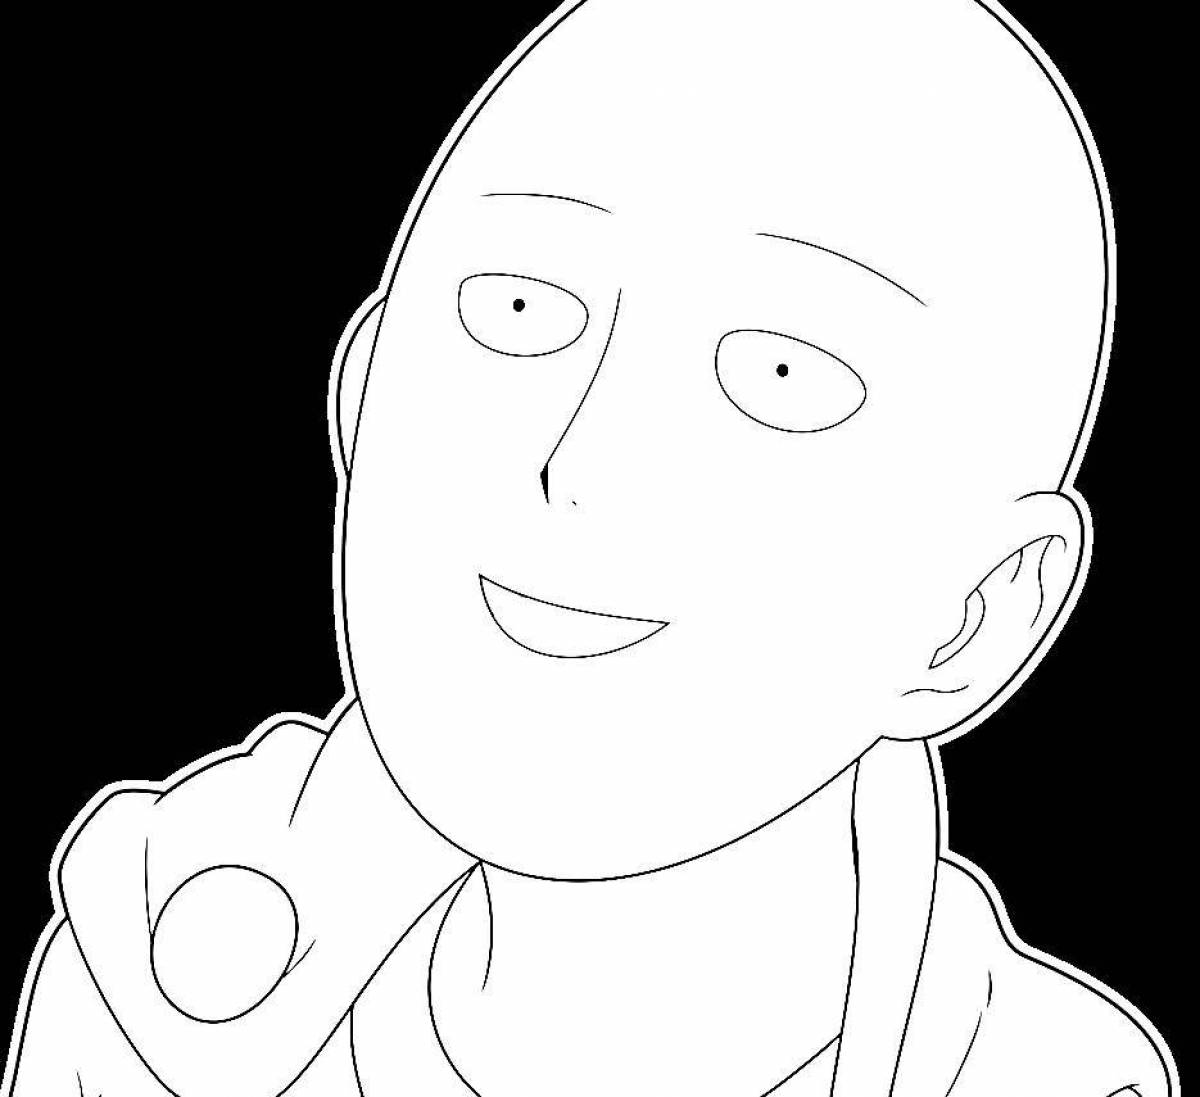 Colorful one-punch man coloring page